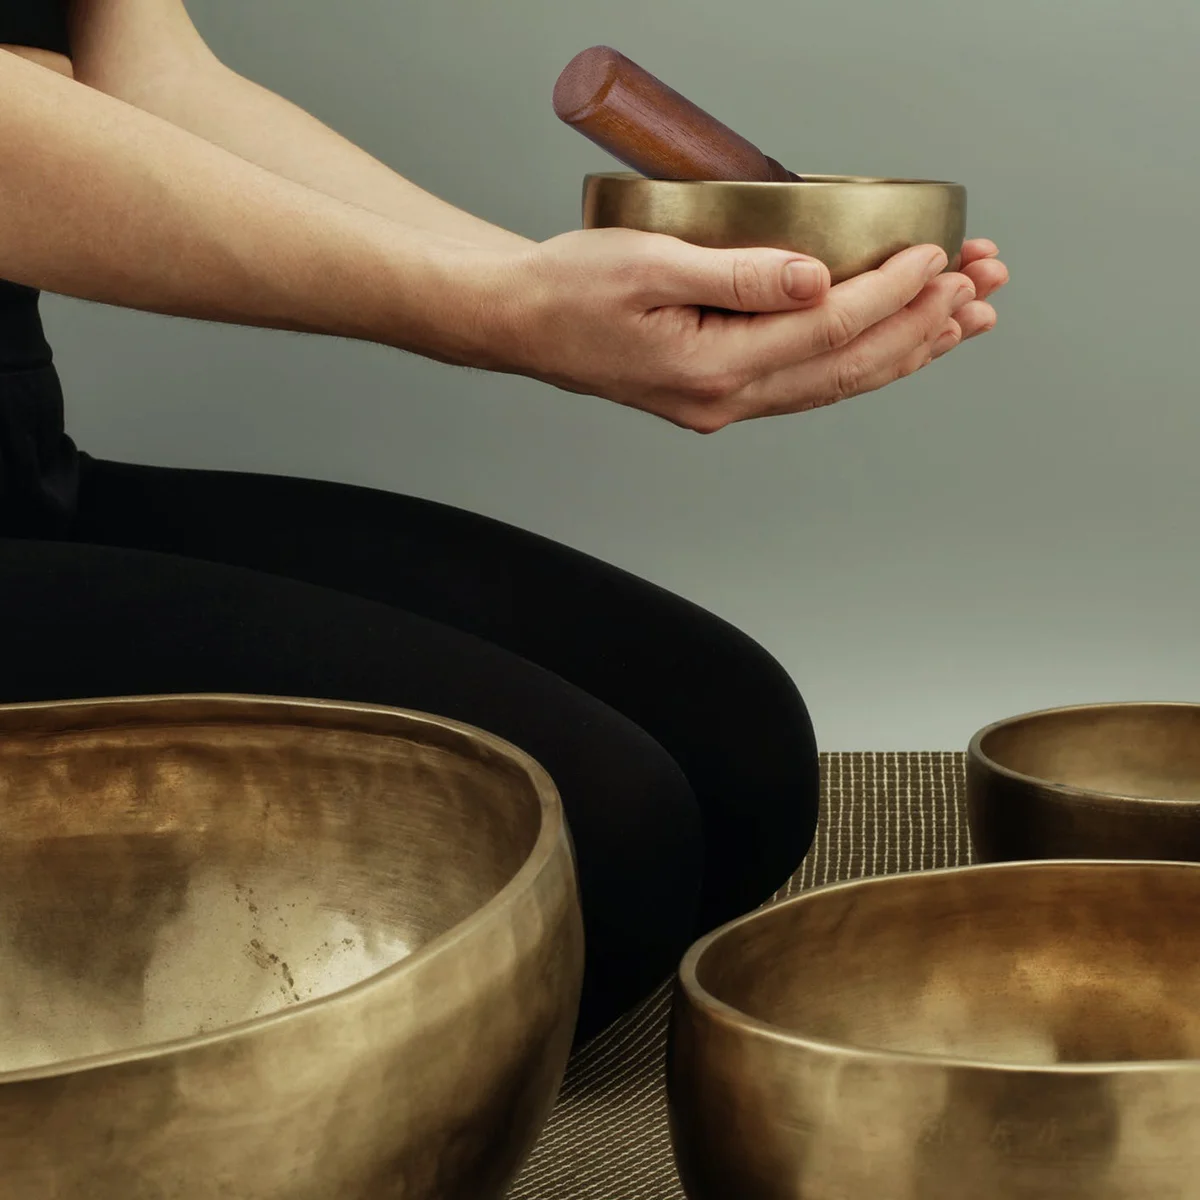 

Tibetan Bowl Mallet Nepalese Handmade Singing Bowl Set with Wooden Mallet for Relaxation Chanting and Meditation